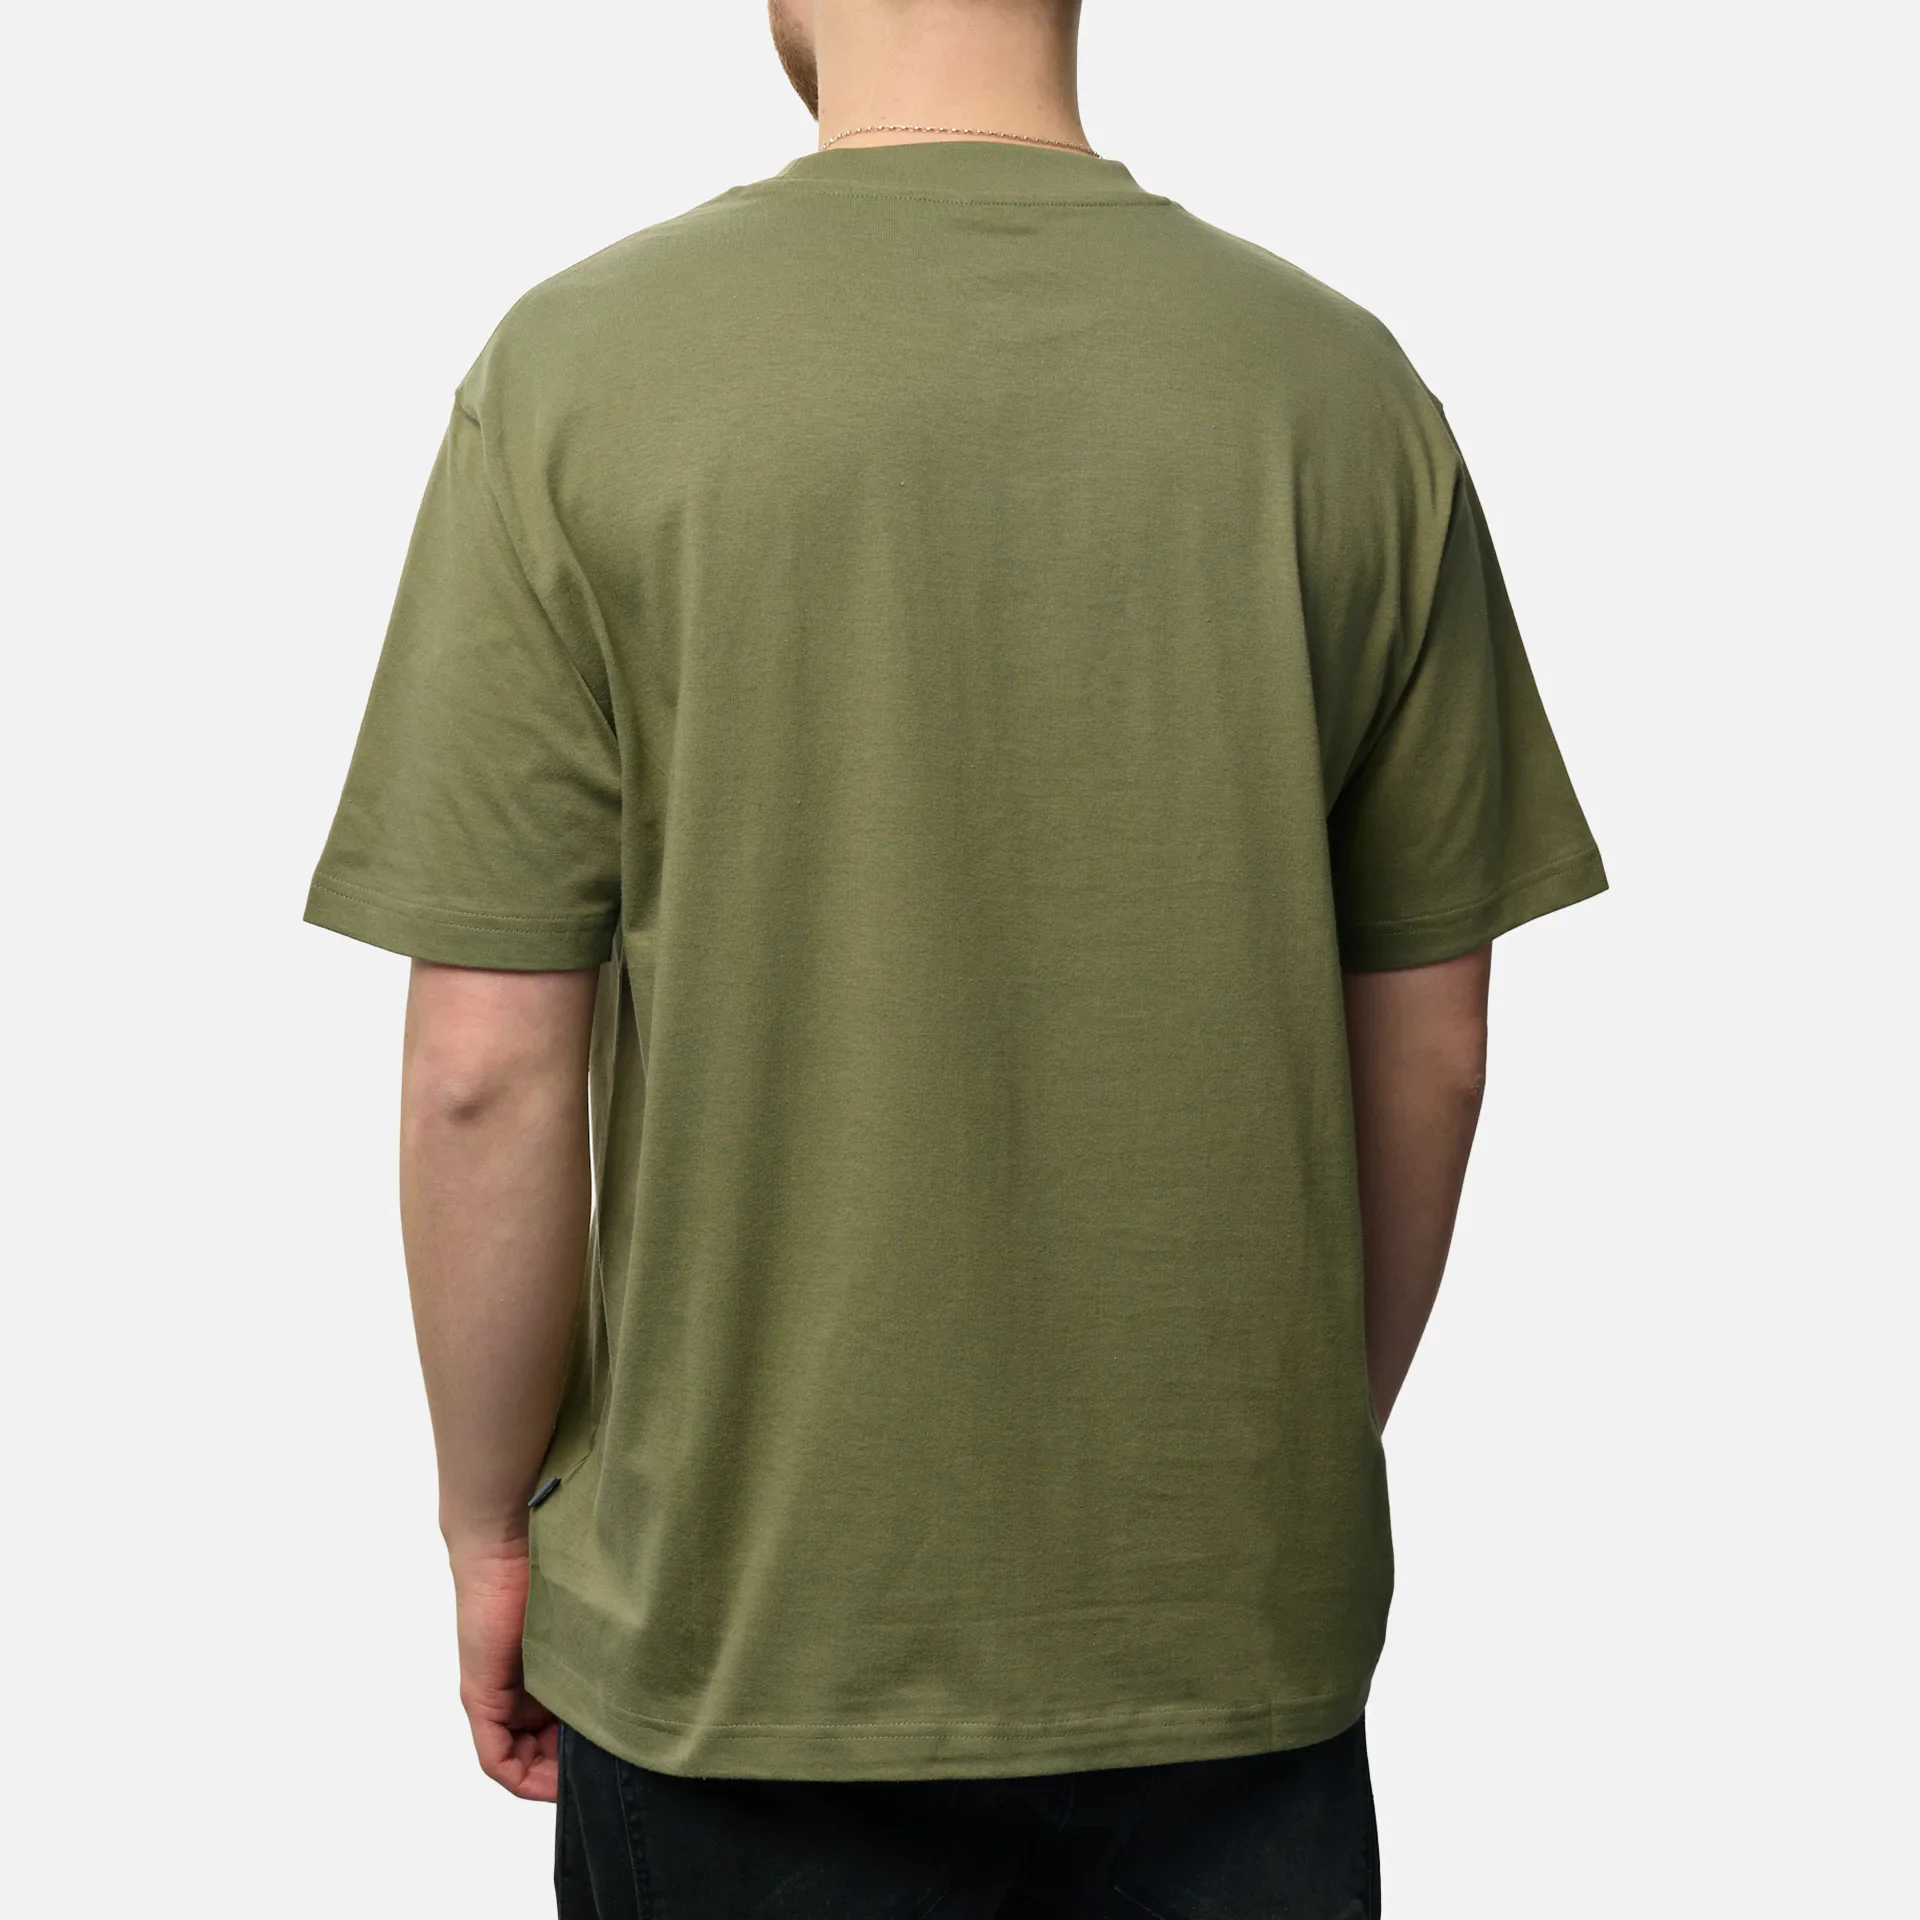 New Balance Relaxed Linear T-Shirt Dark Olive